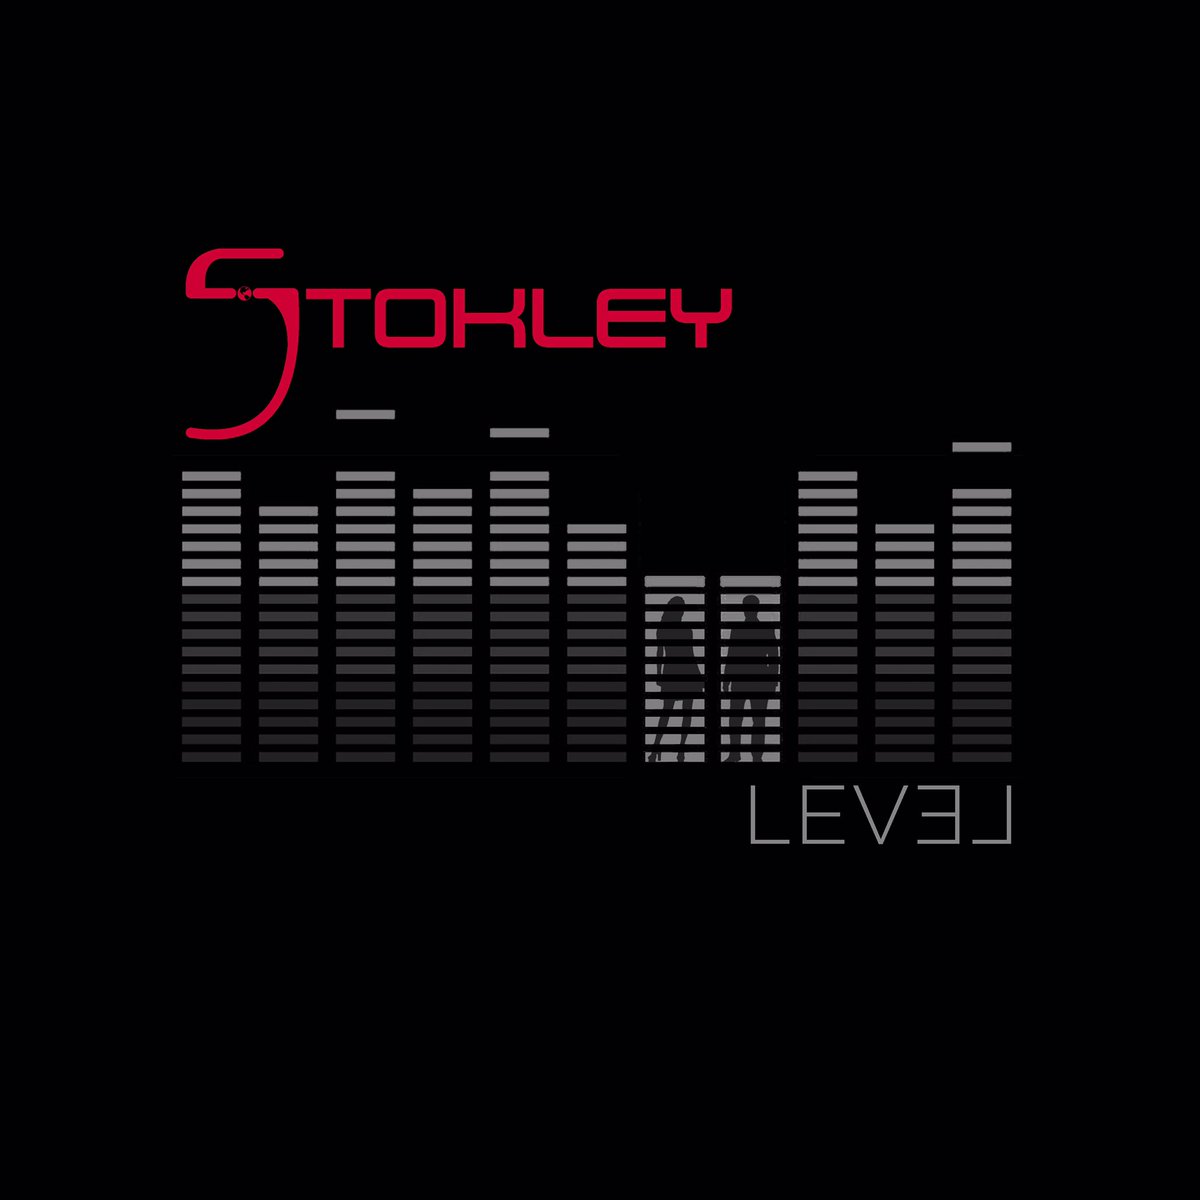 Stokley of Mint Condition Releases First Solo Single "Level", Readies Debut Album